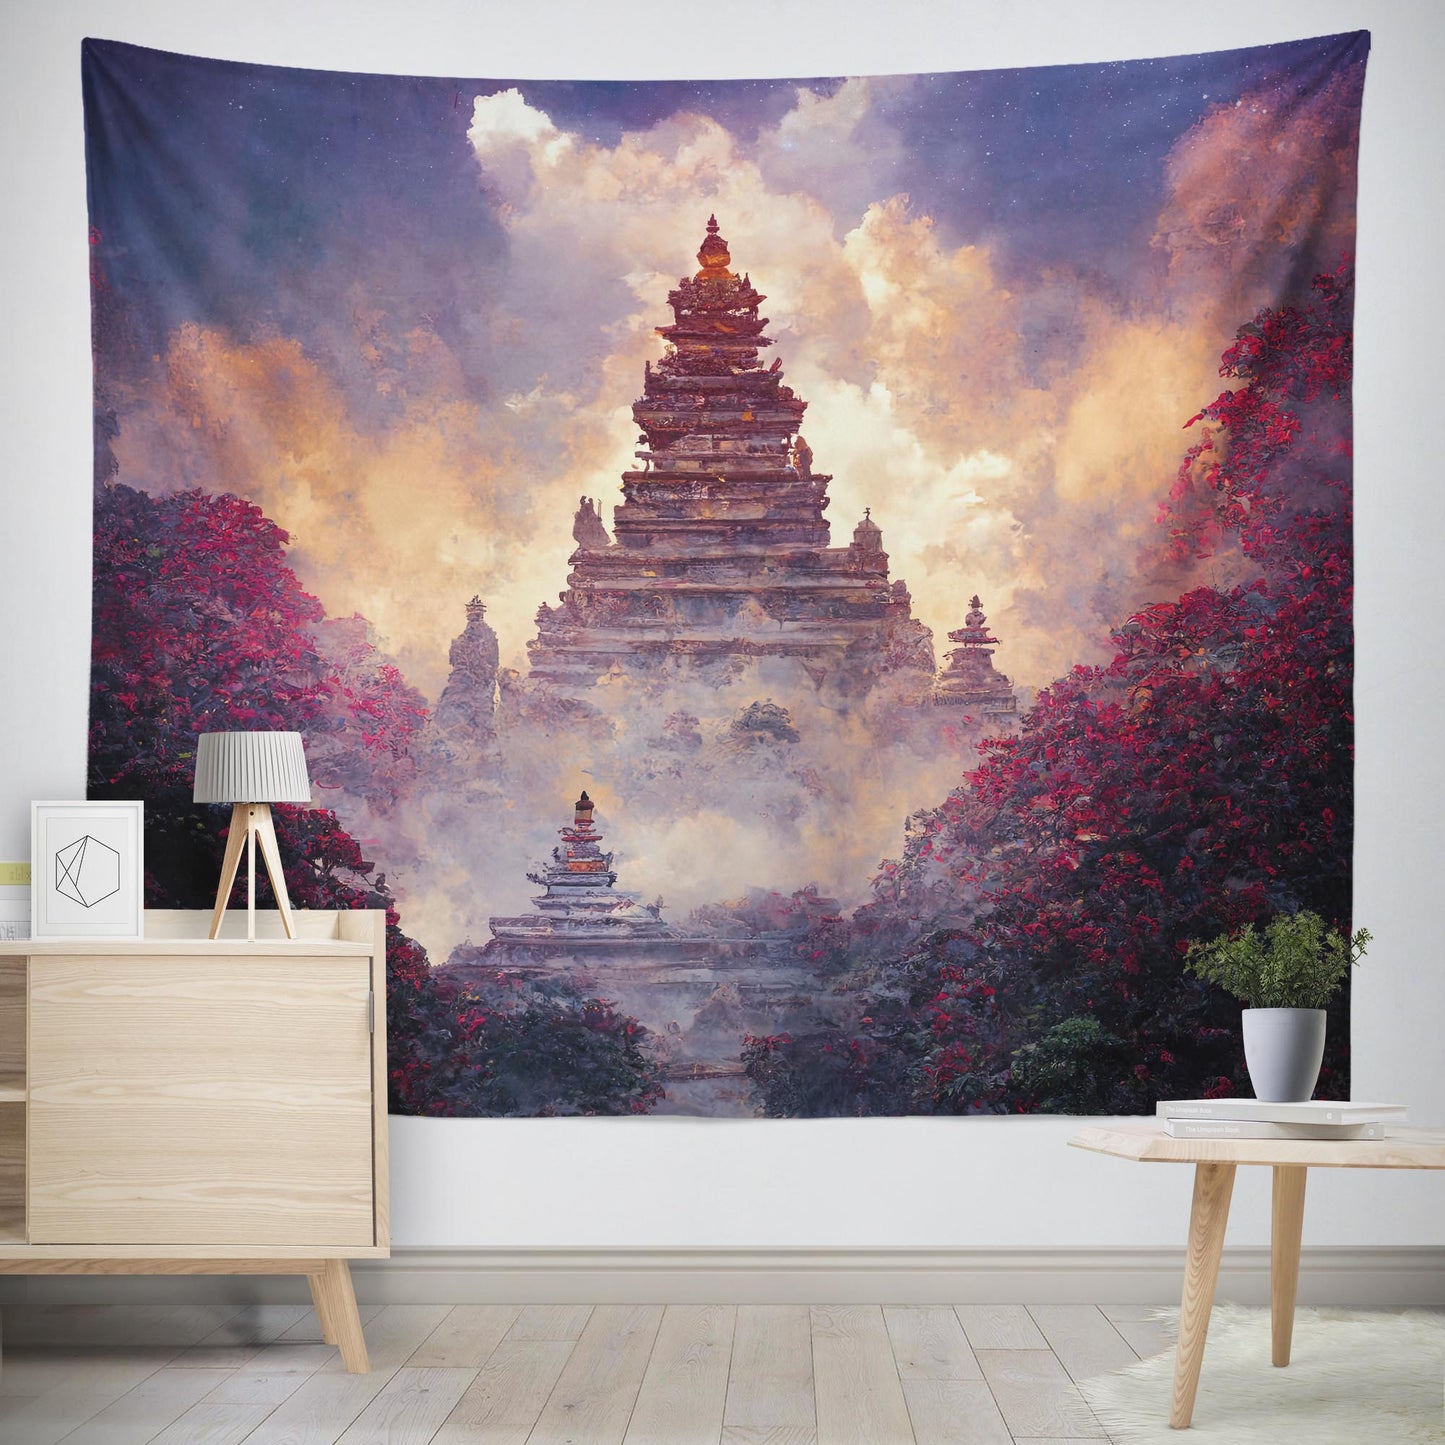 Large wall tapestry of buddhist temple in the mountains with clouds